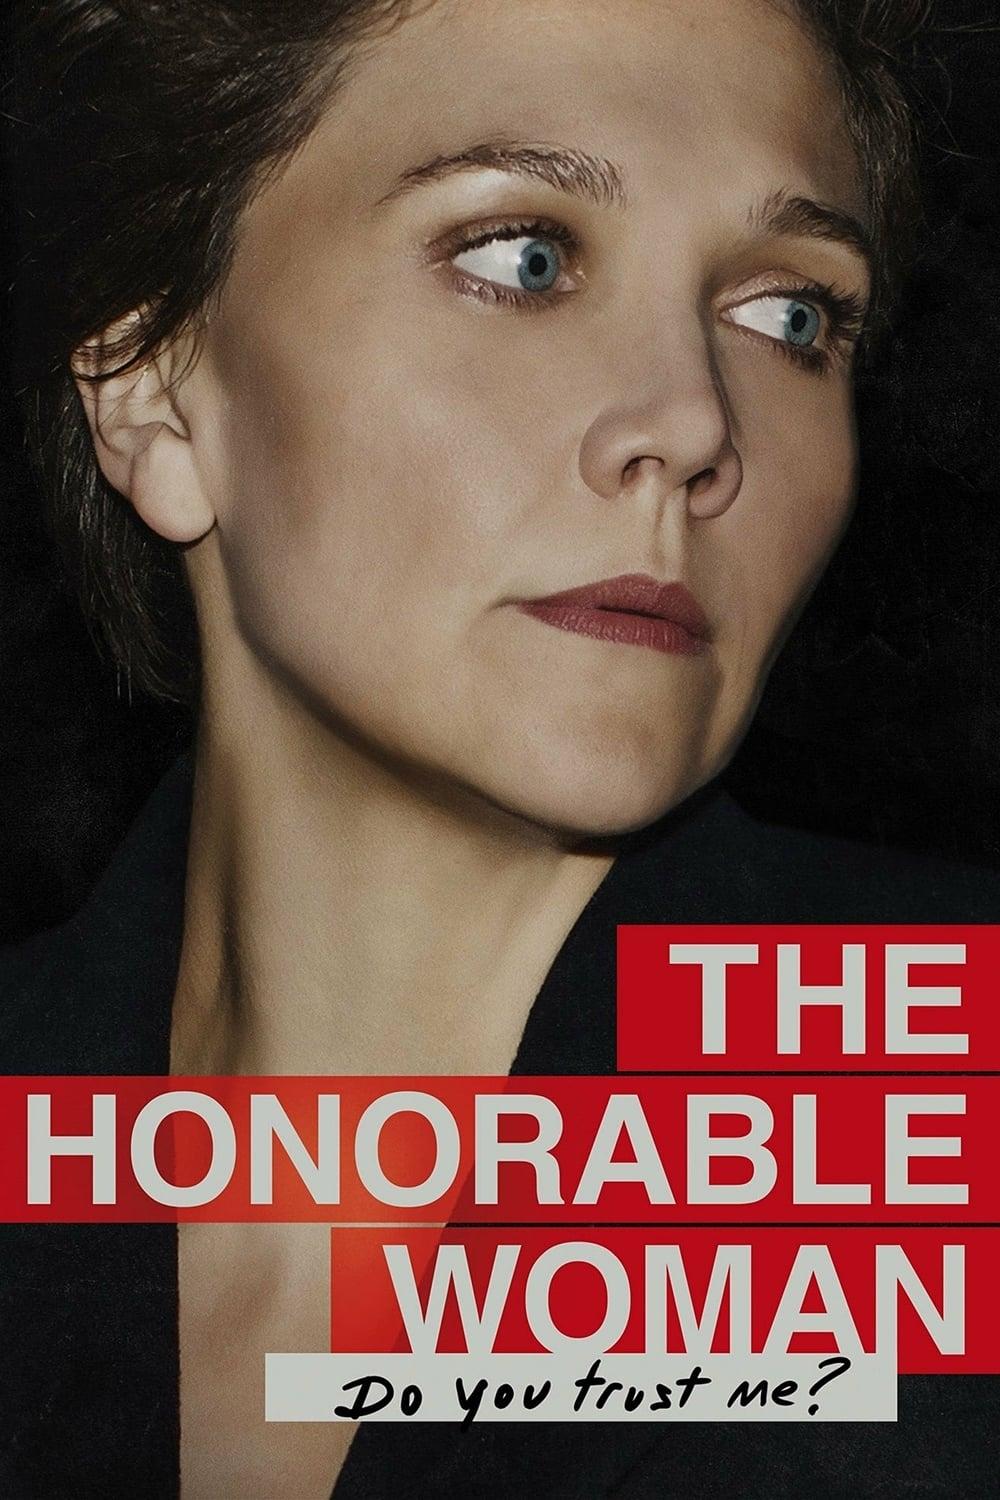 The Honourable Woman poster